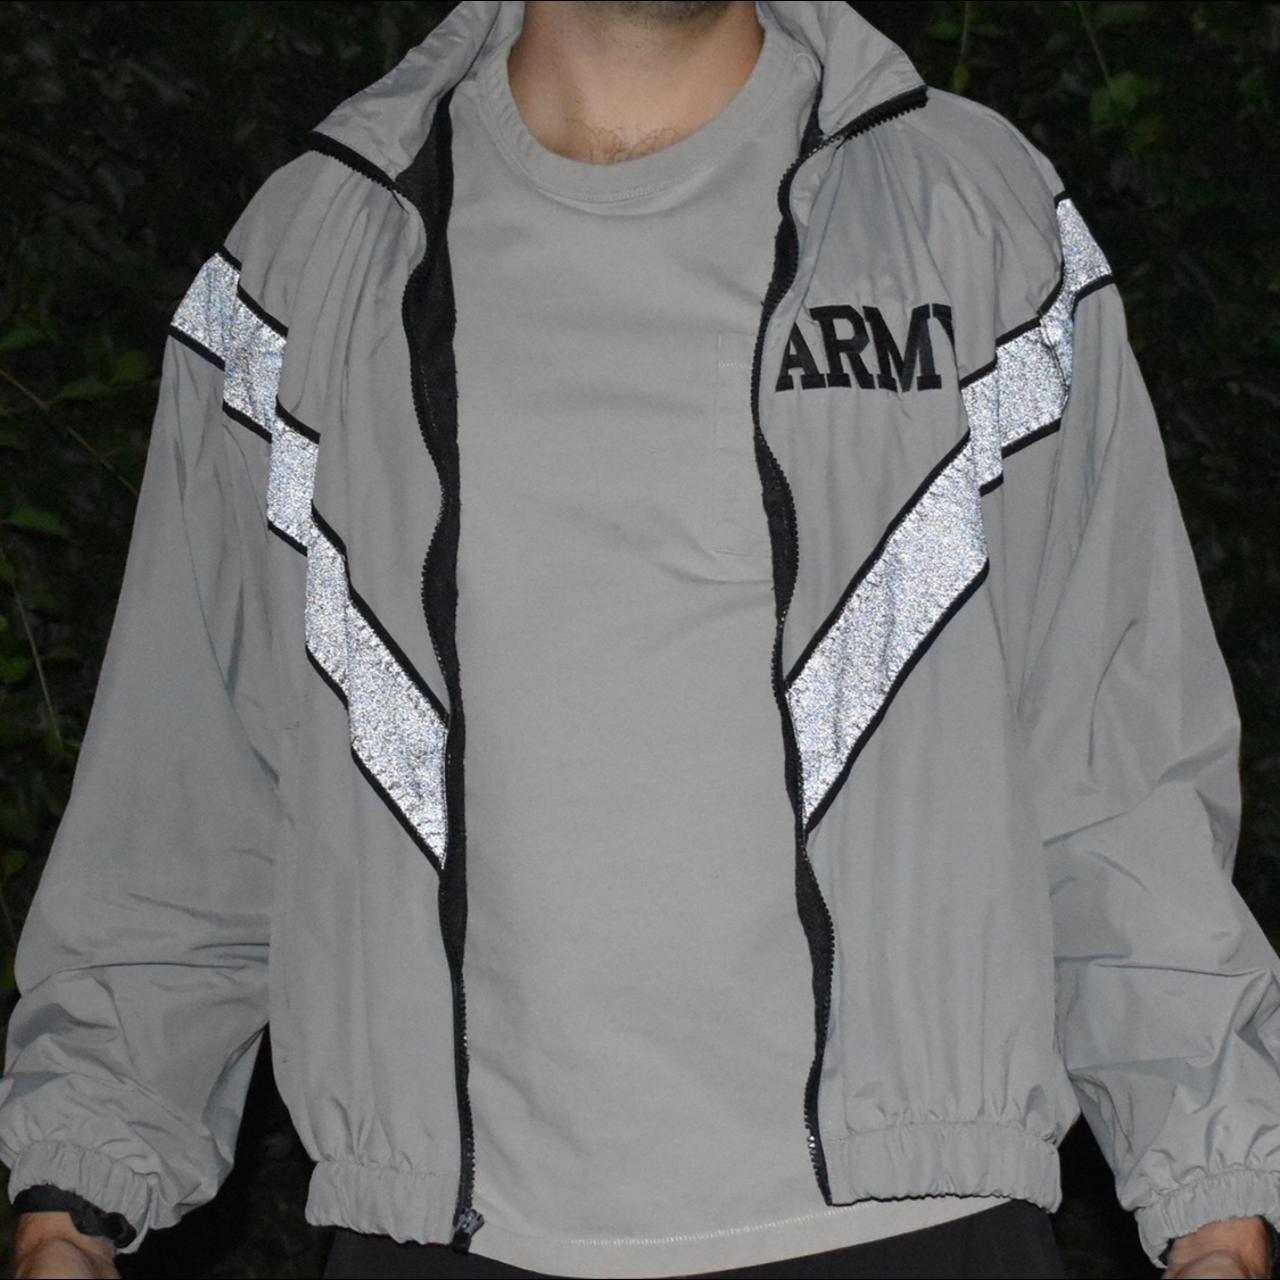 Product Image 3 - Vintage ARMY Jacket

Authentic ARMY Jacket